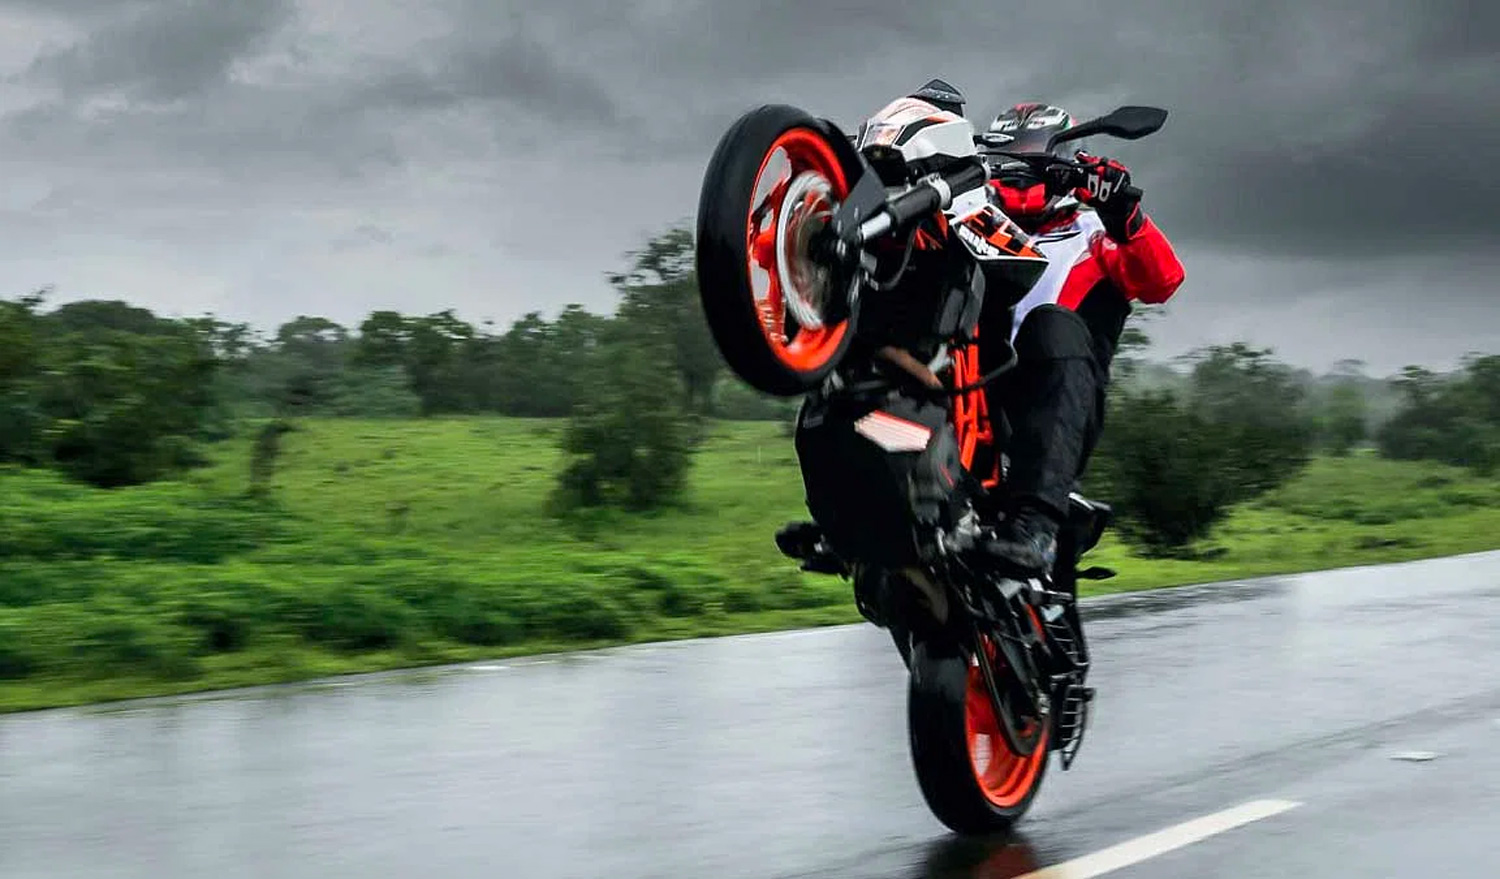 A motorcyclists performs a wheelie on a motorcycle